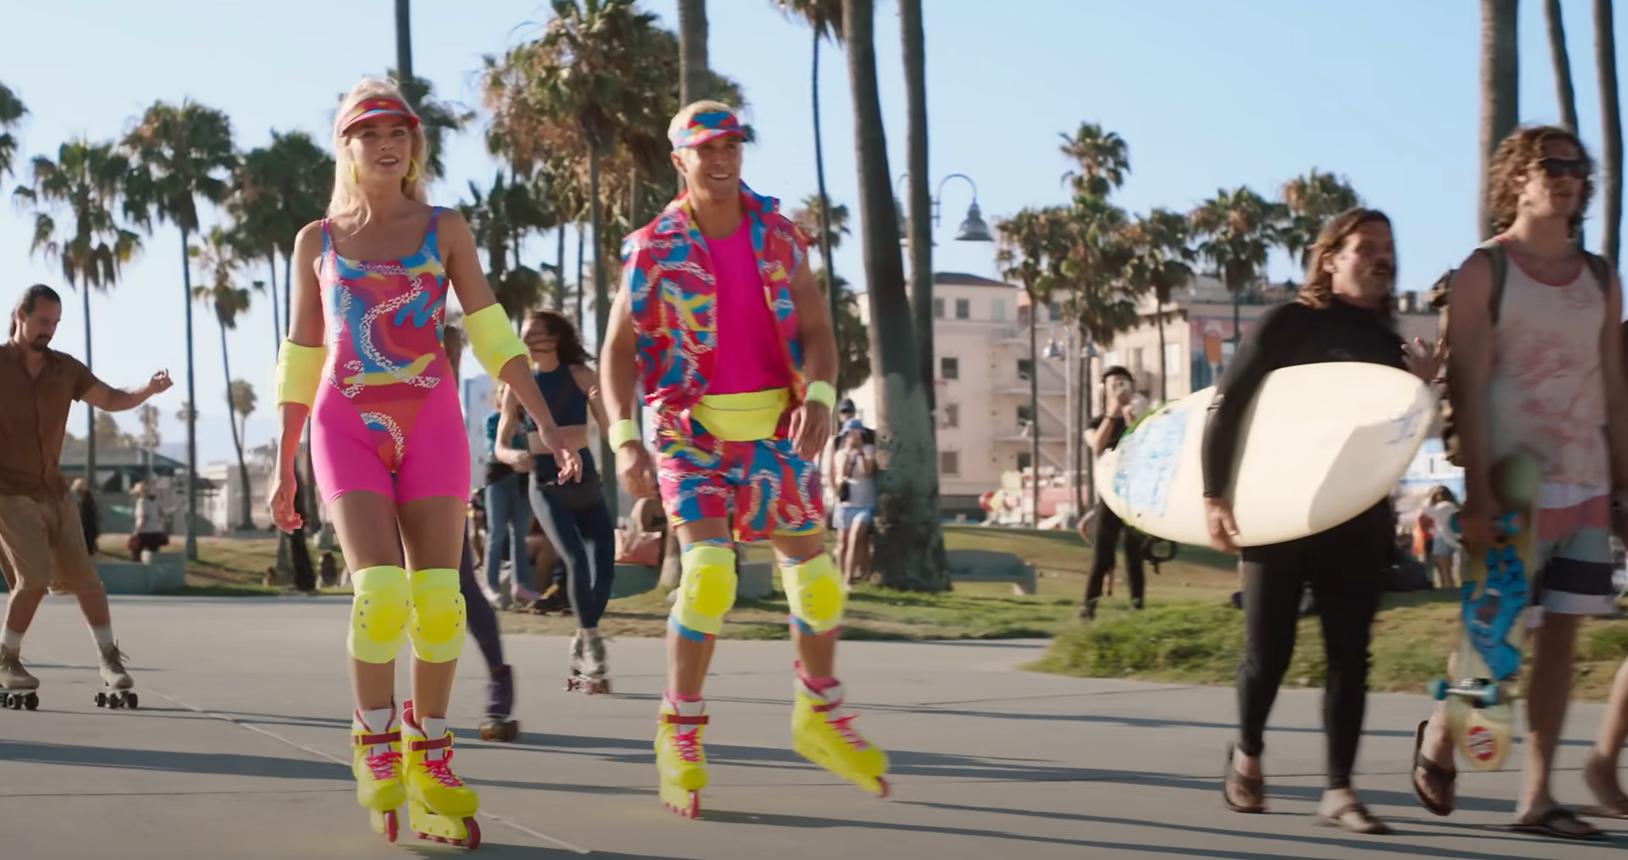 Still image from Barbie movie featuring Barbie and Ken rollerskating